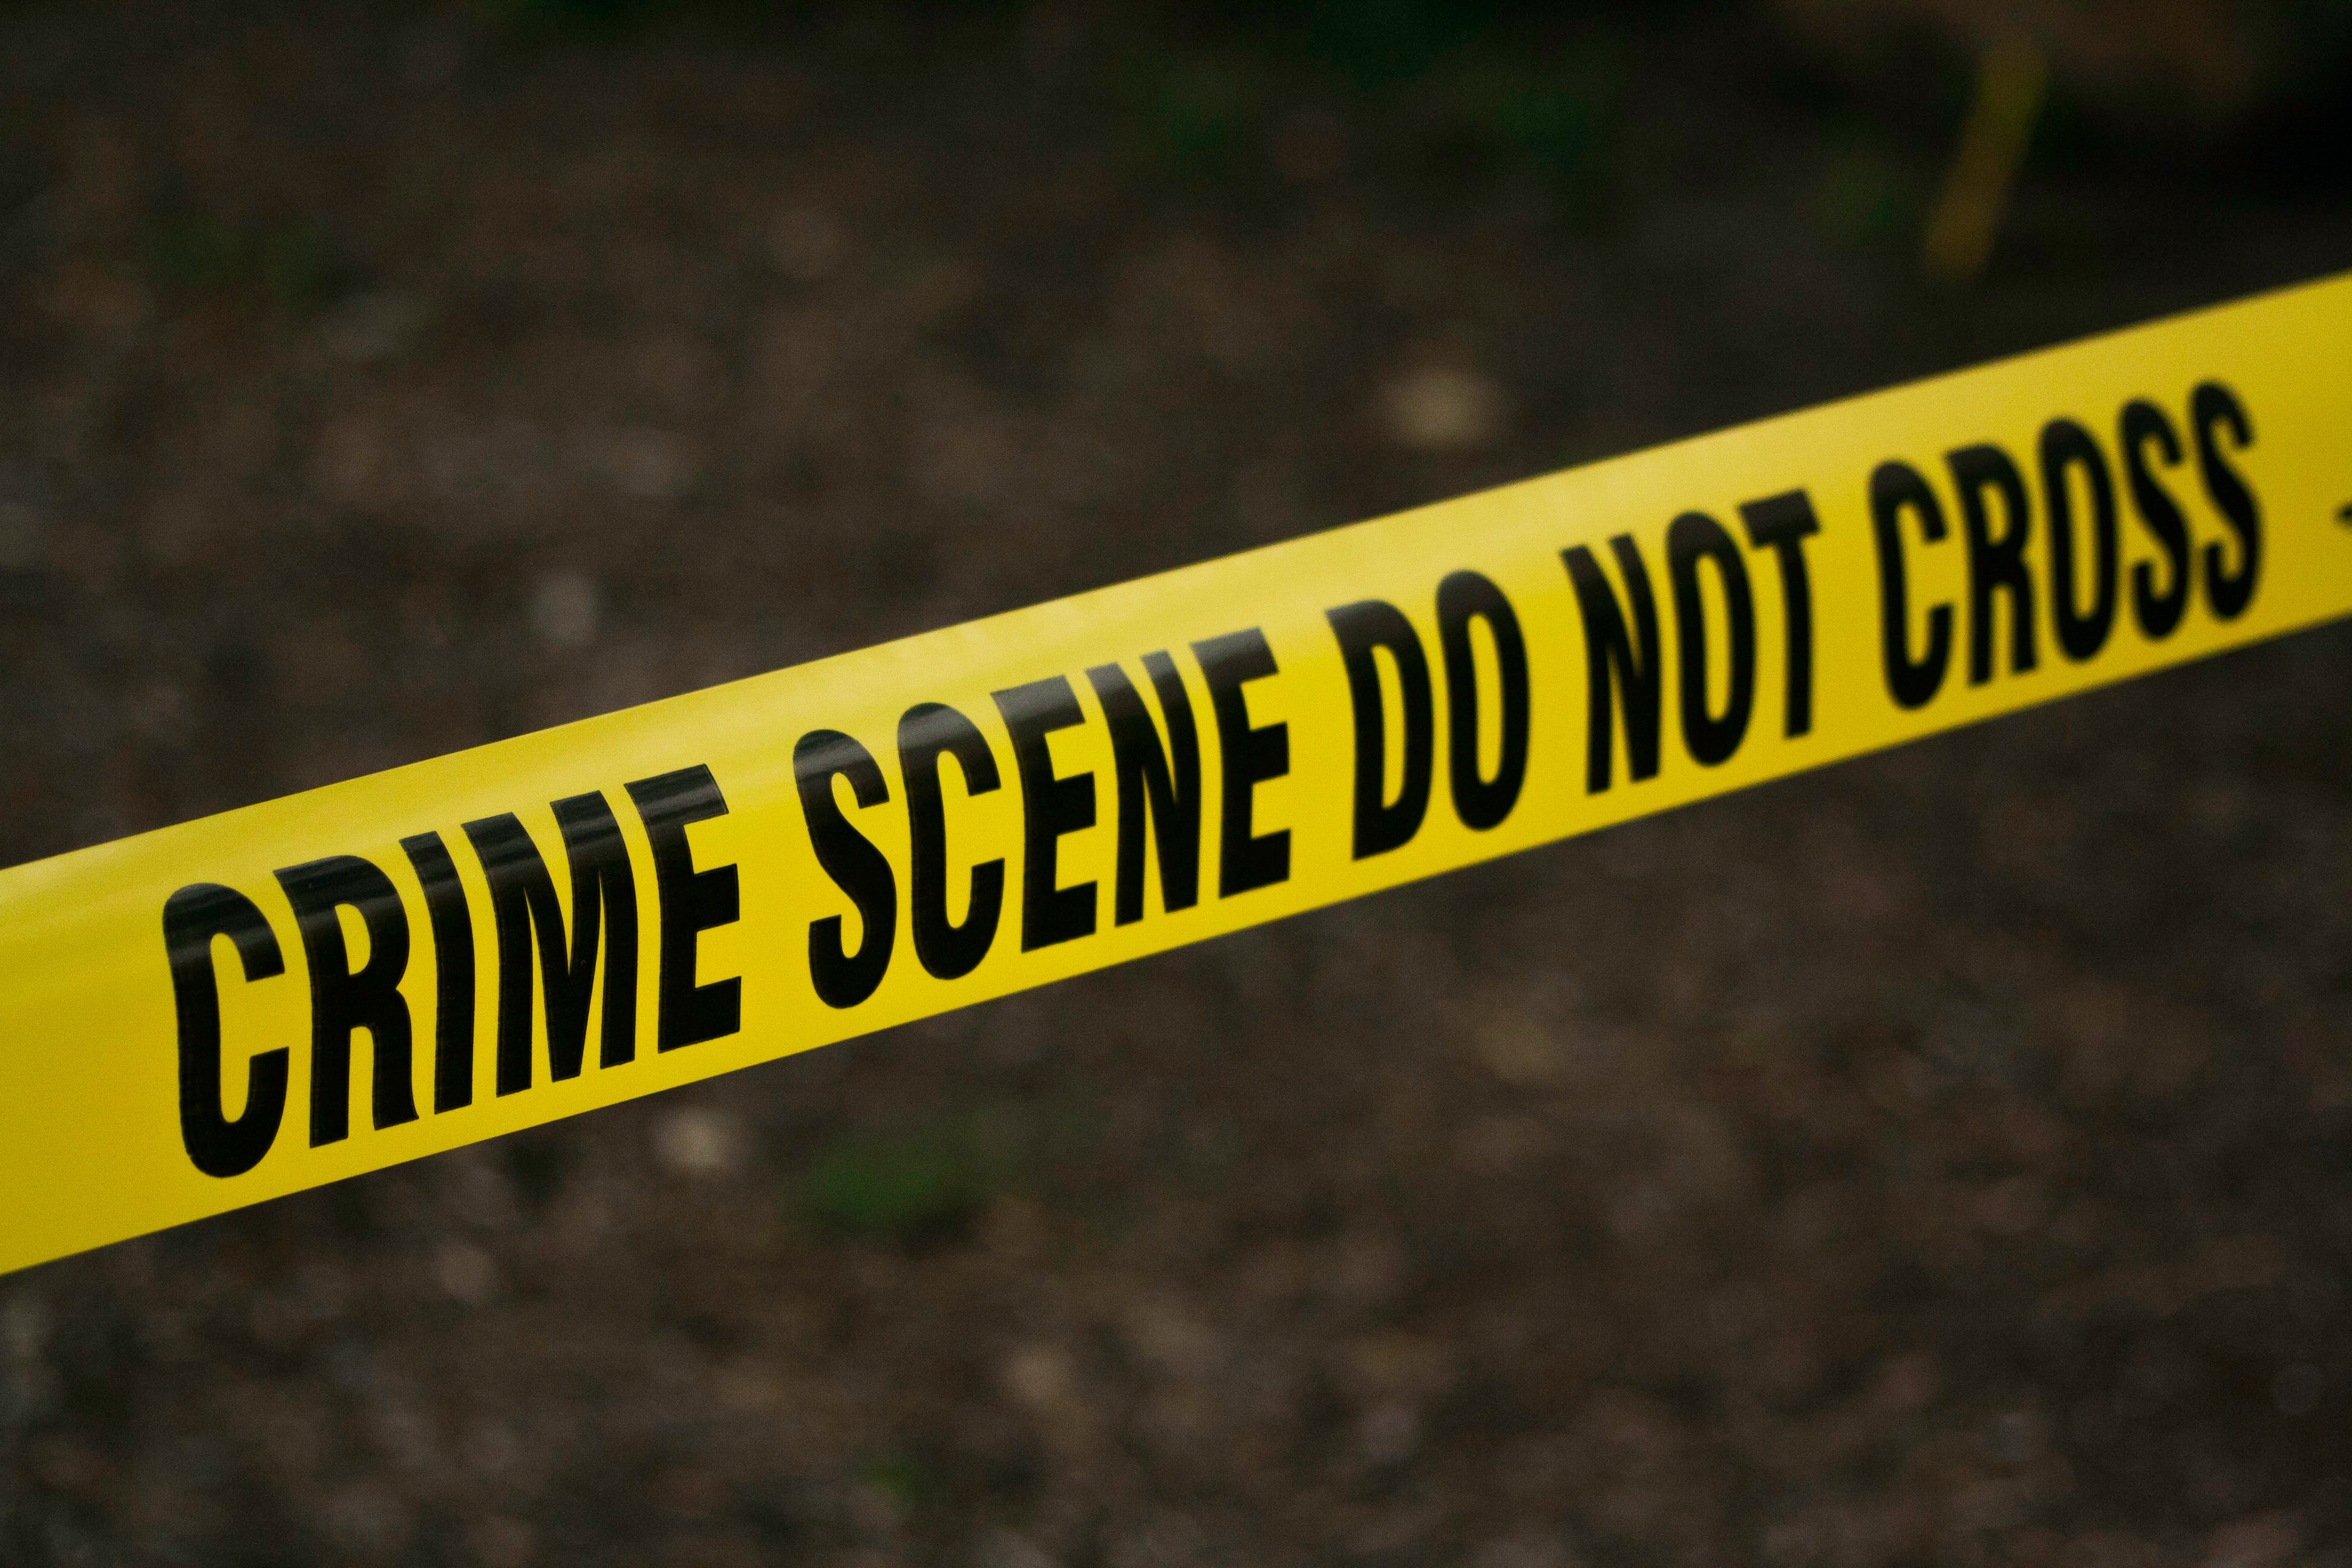 Pictured - An image of a crime scene do not cross signage | Source: Pexels 